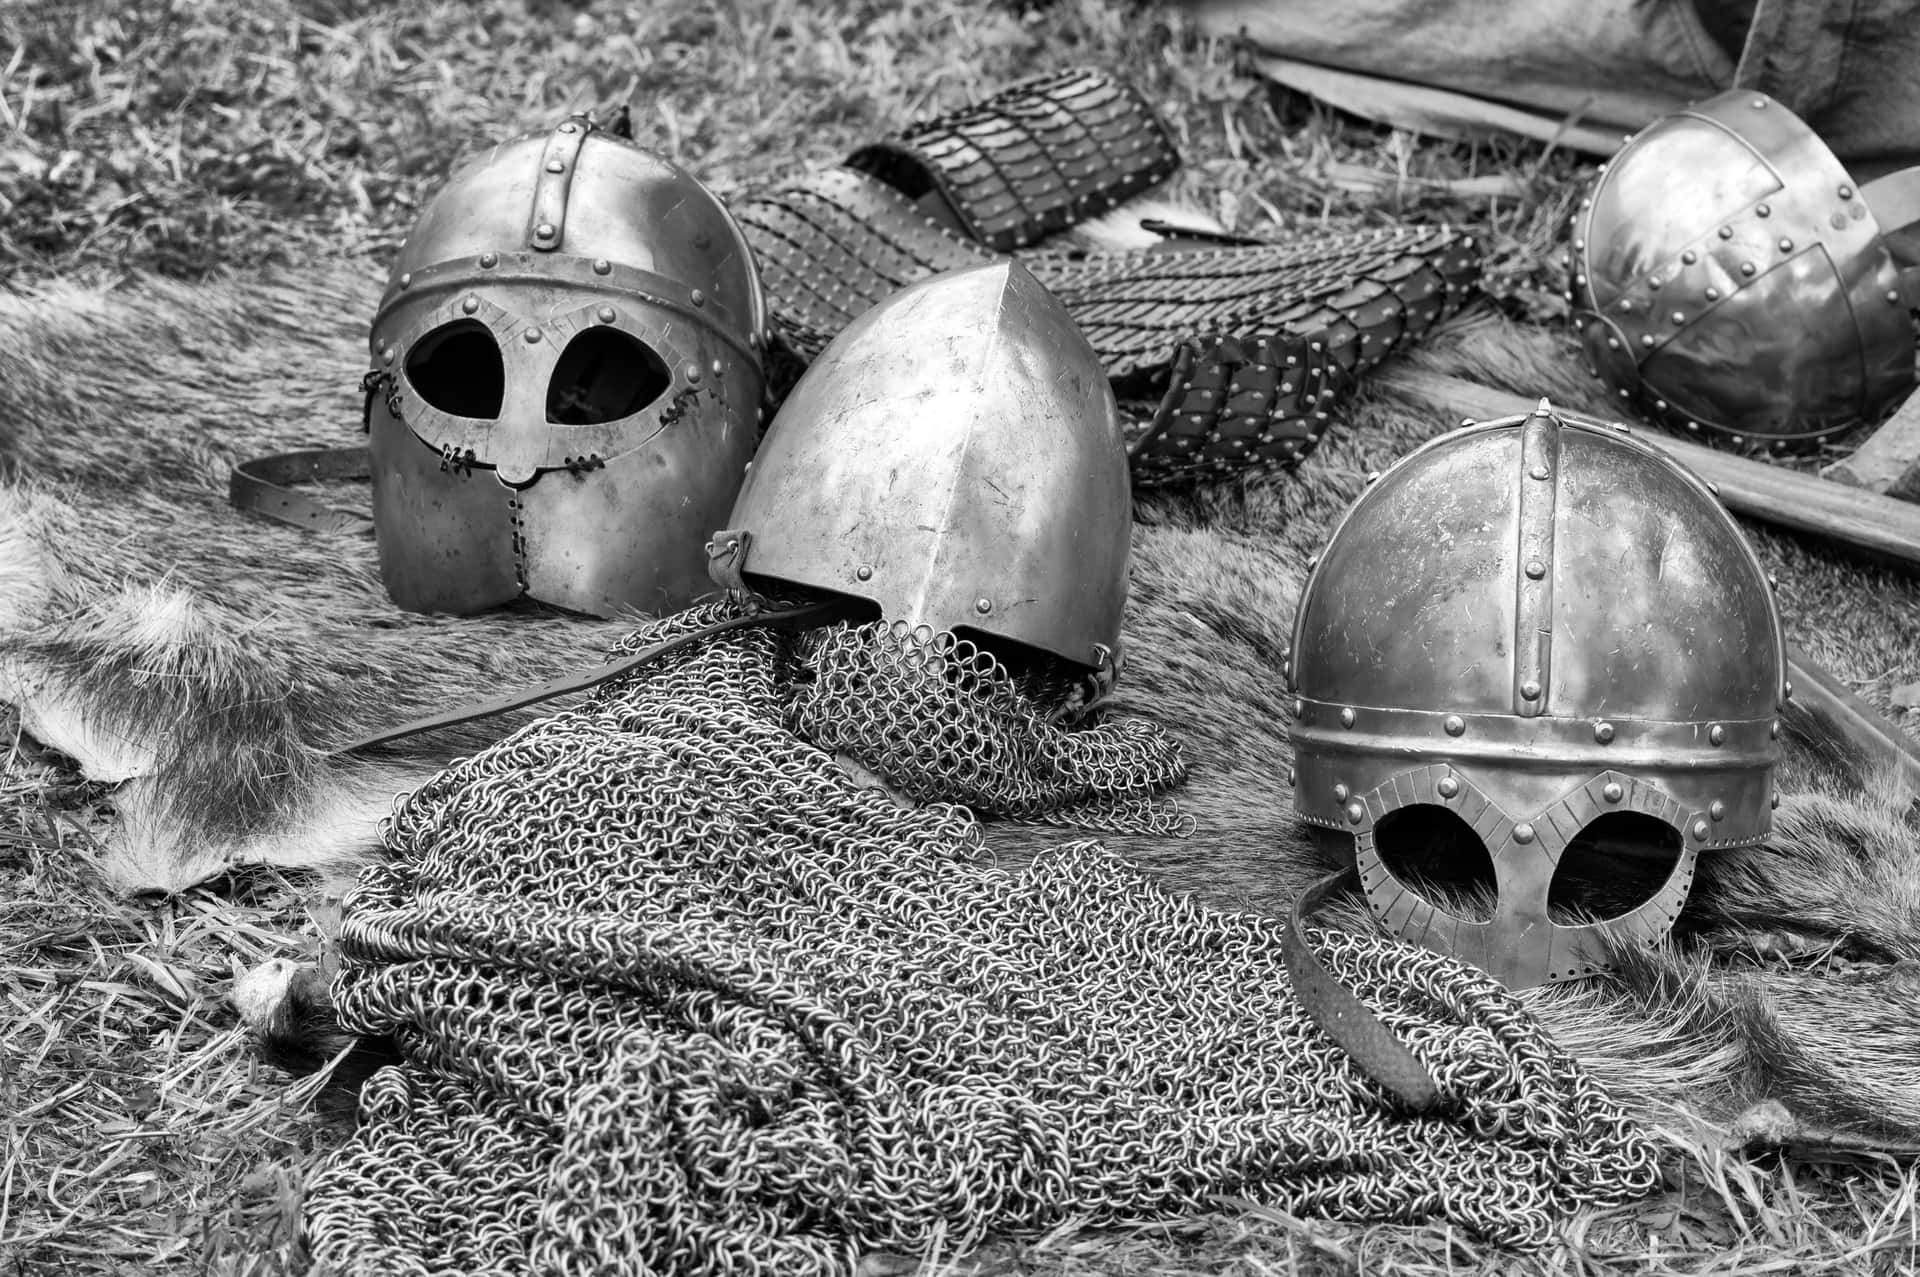 Viking Helmets And Shields On The Ground